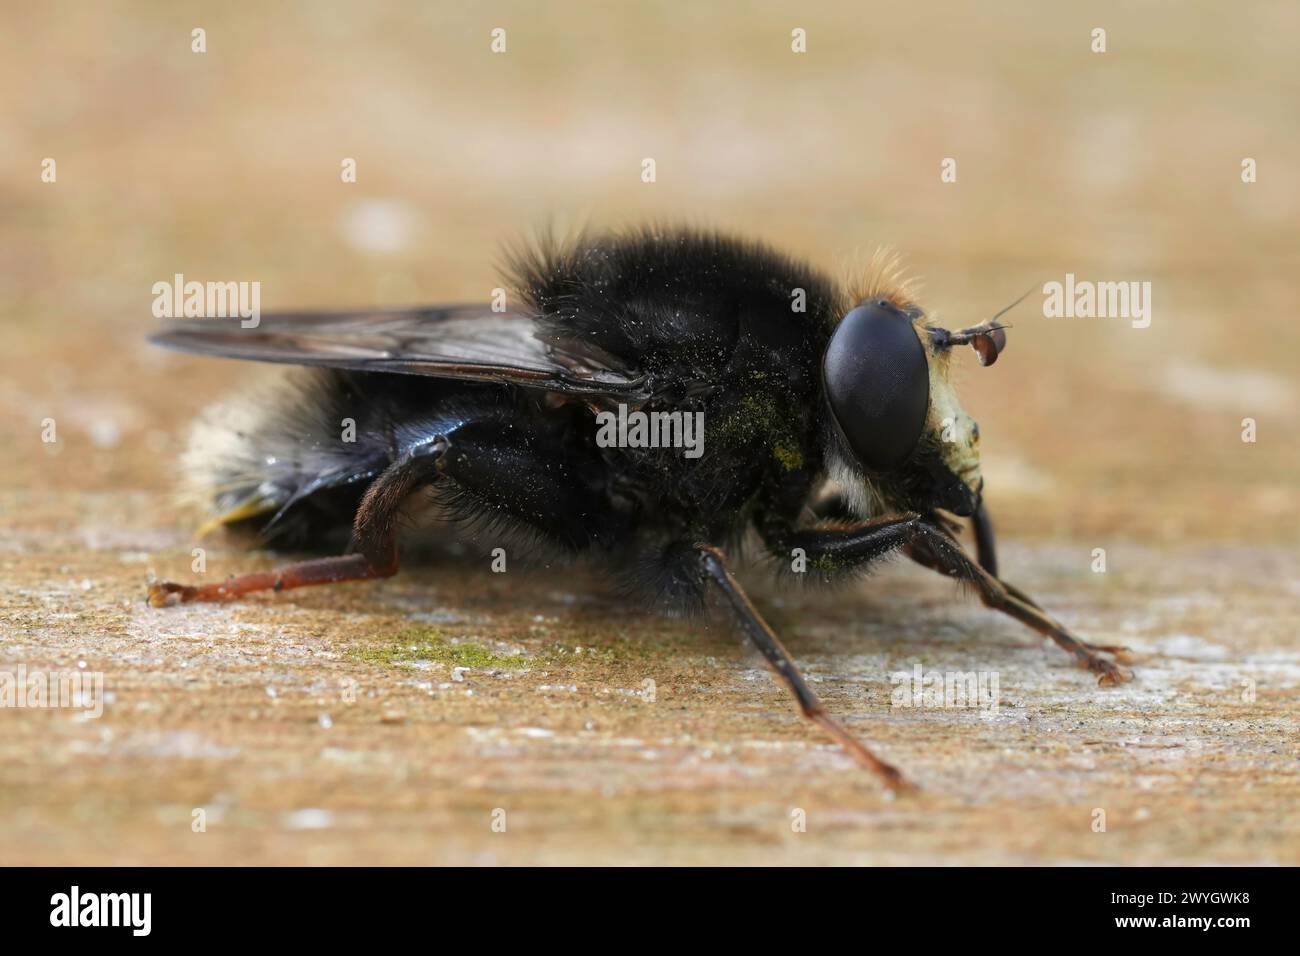 Natural detailed coseup on the rare and dark colored Large bearfly, Criorhina ranunculi sitting on wood Stock Photo